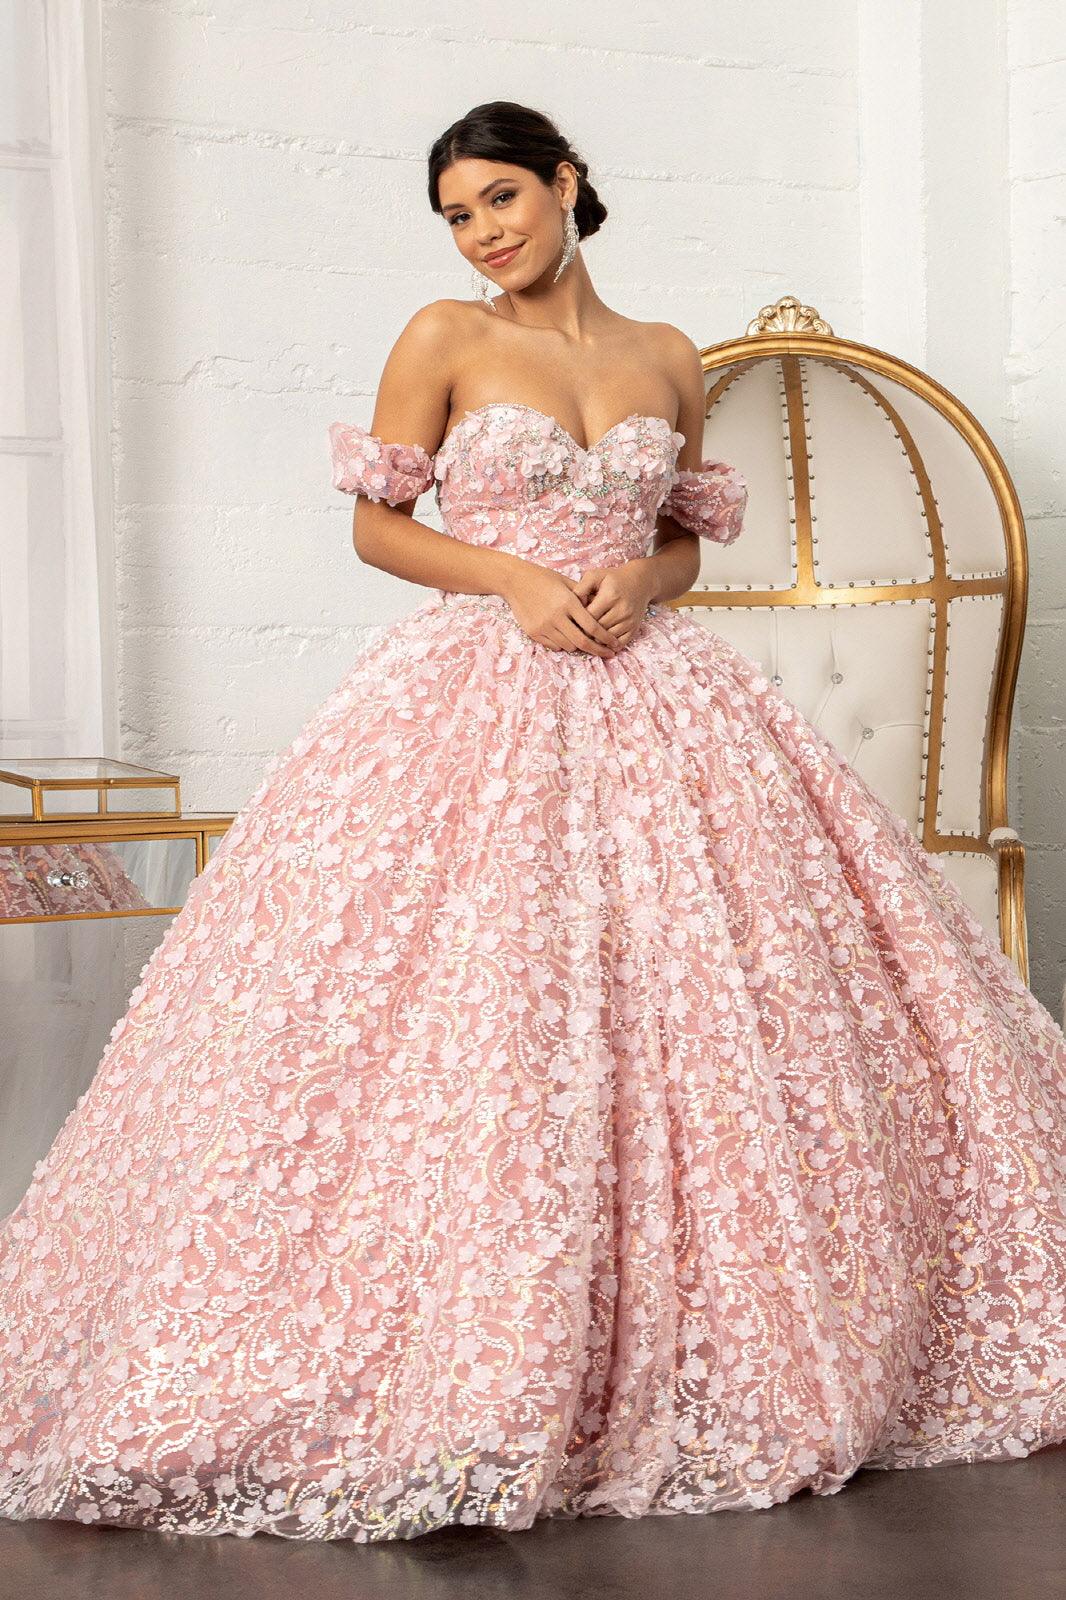 Long Quinceanera Dress Off Shoulder Mesh Ball Gown - The Dress Outlet